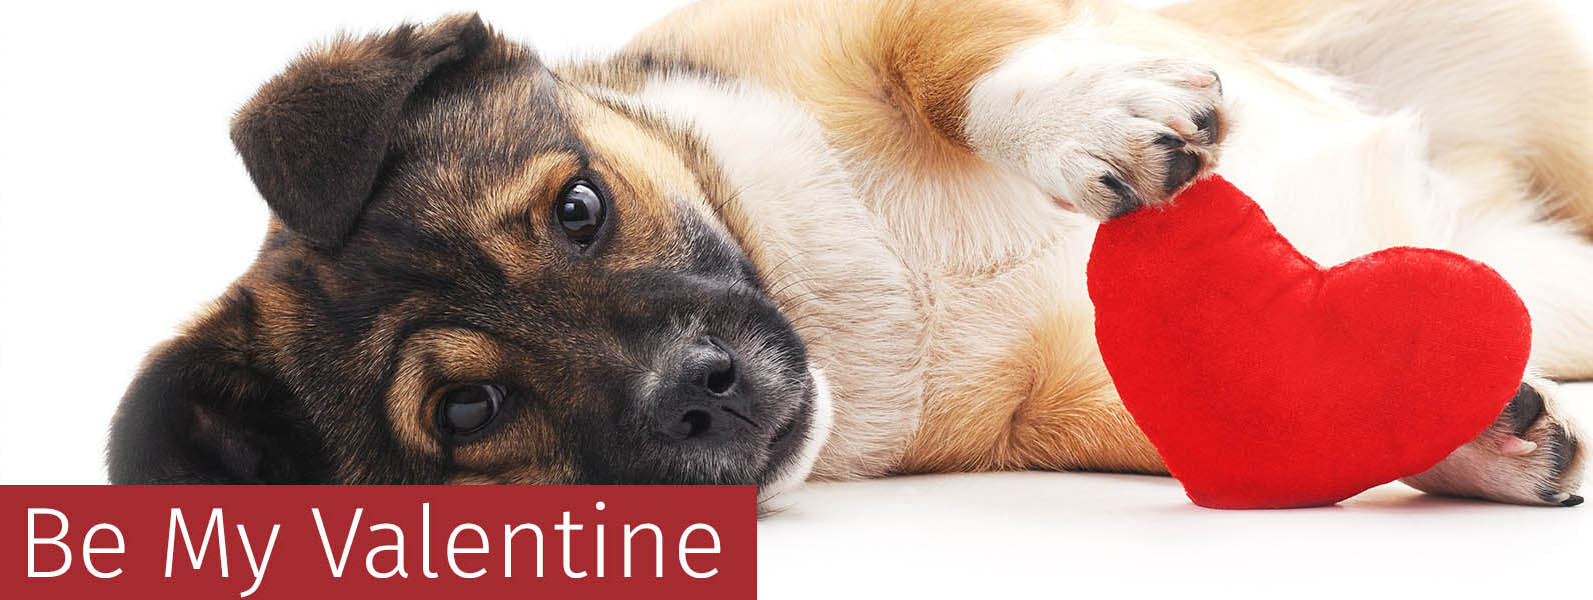 Pawfect Valentine's Day Gifts